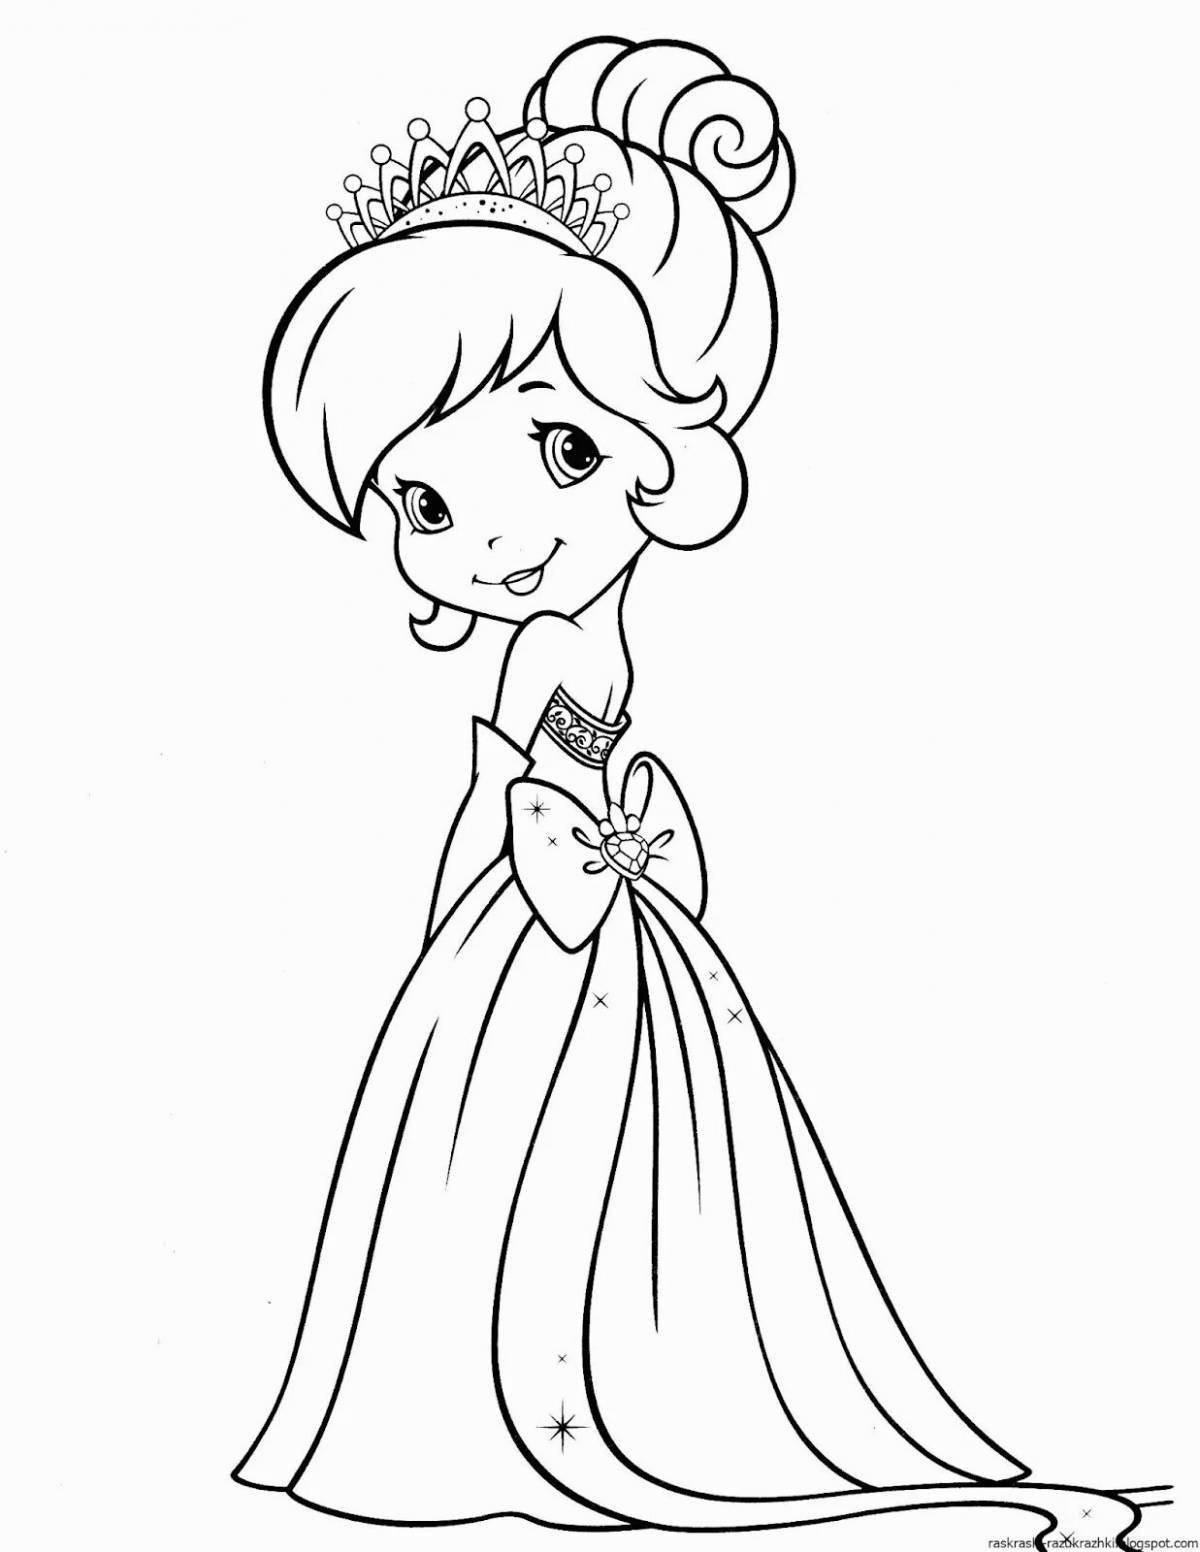 Princess glitter coloring pages for girls 6 years old